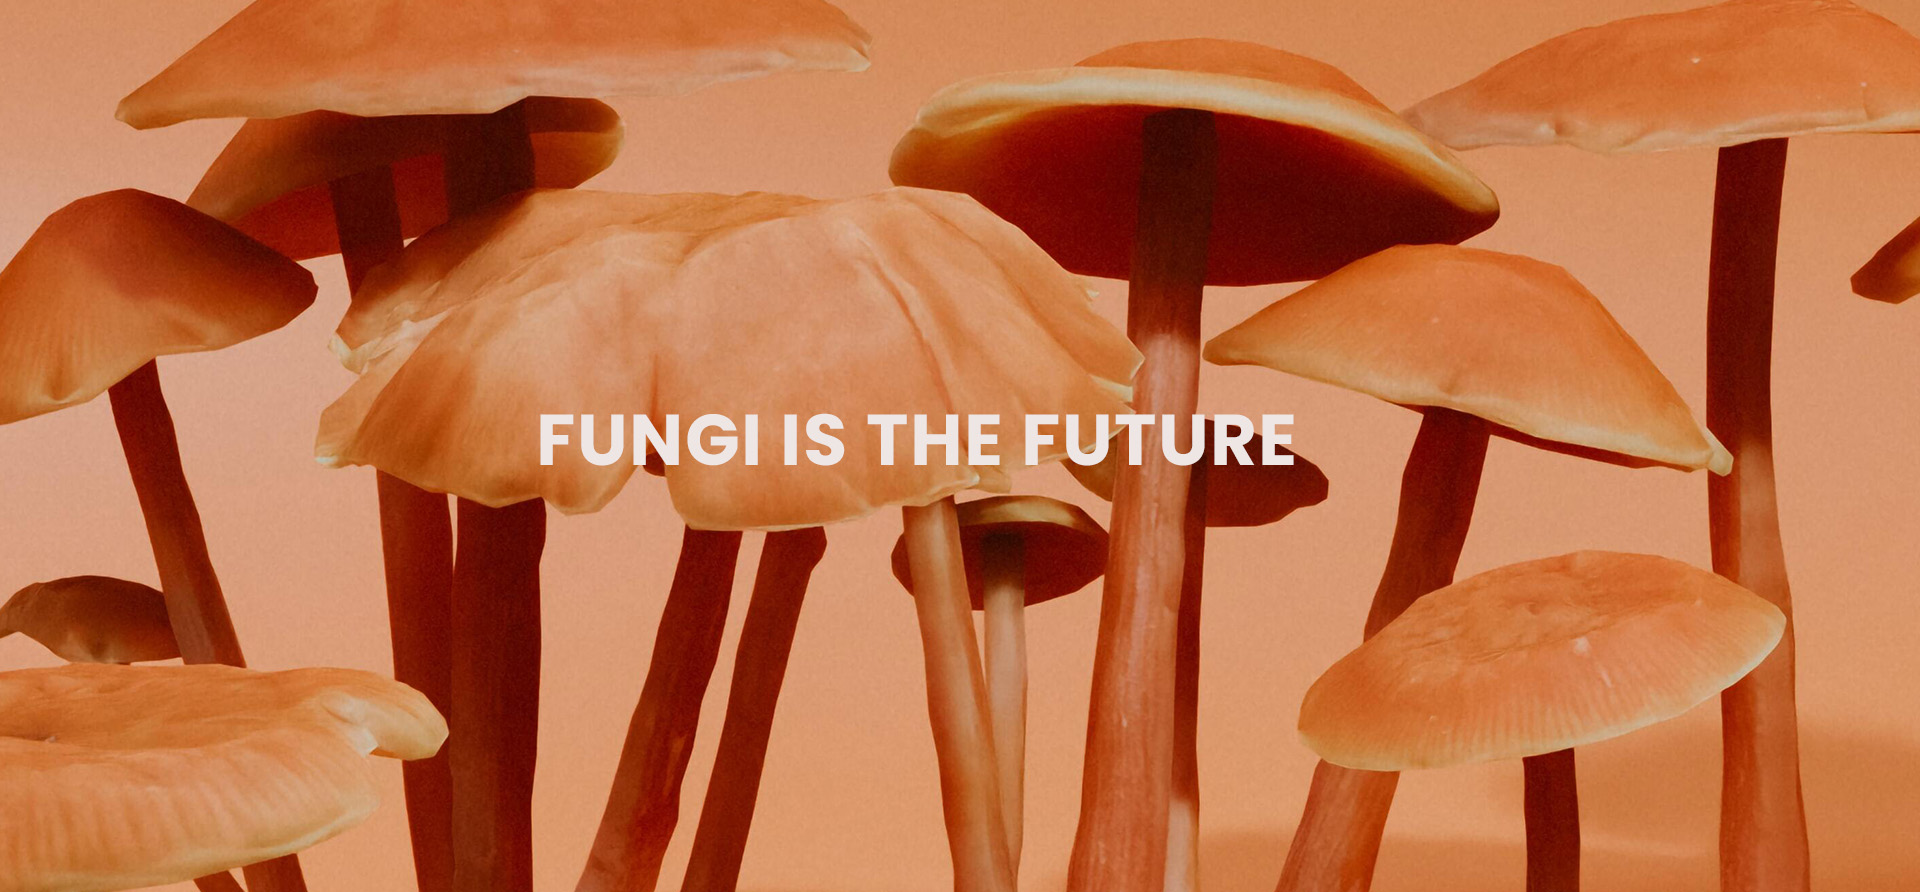 Fungi is the future. The natural material turns out to be a fantastic alternative to plastic packaging.